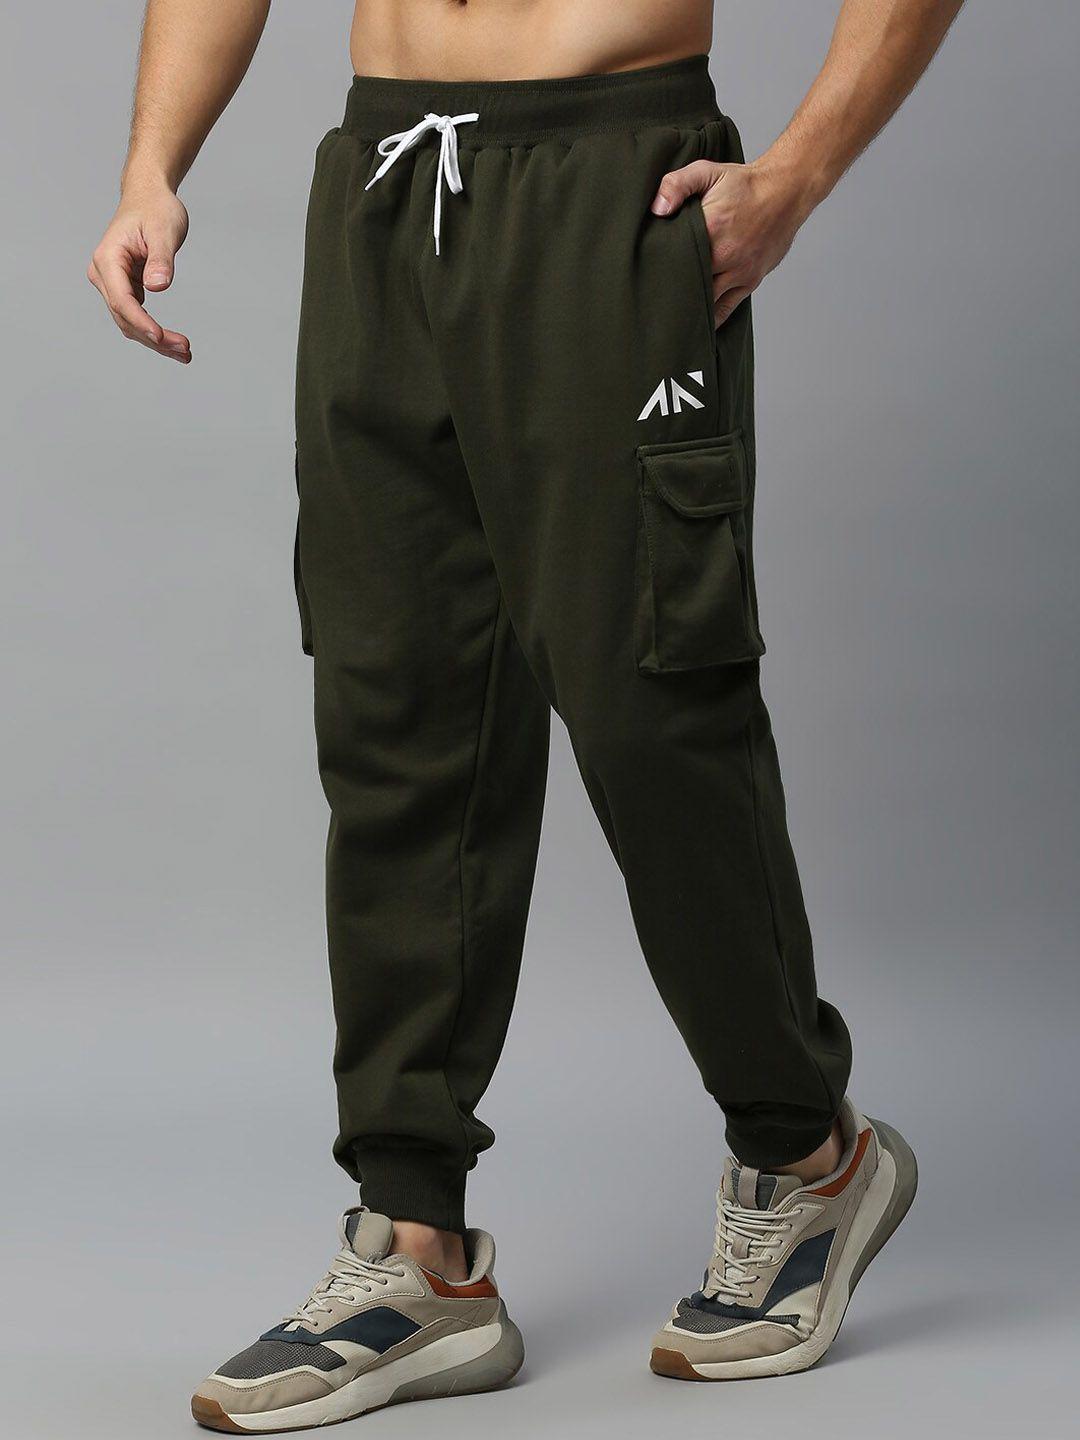 aesthetic nation men mid-rise relaxed-fit joggers